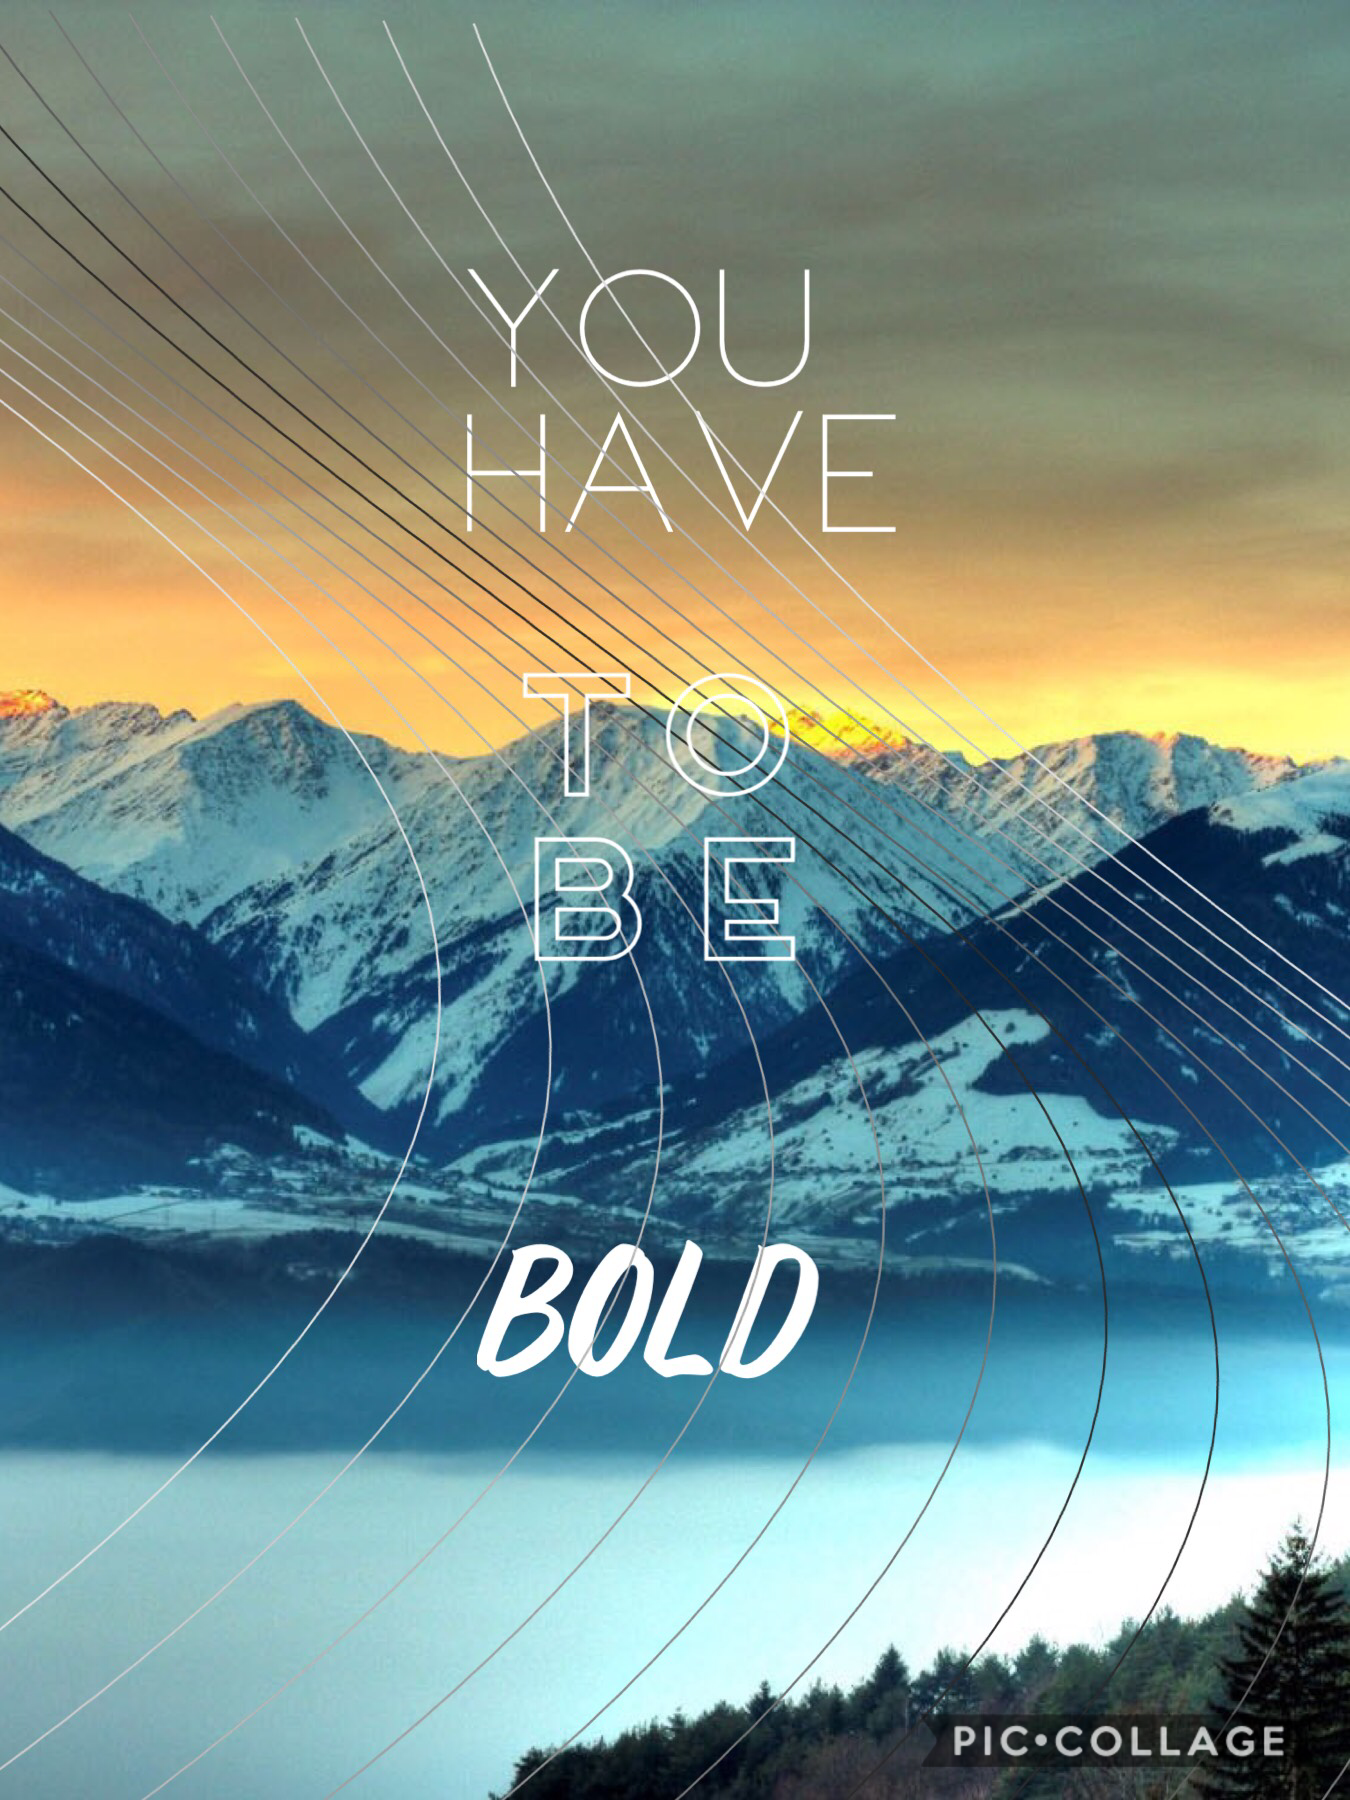 Bold is the answer